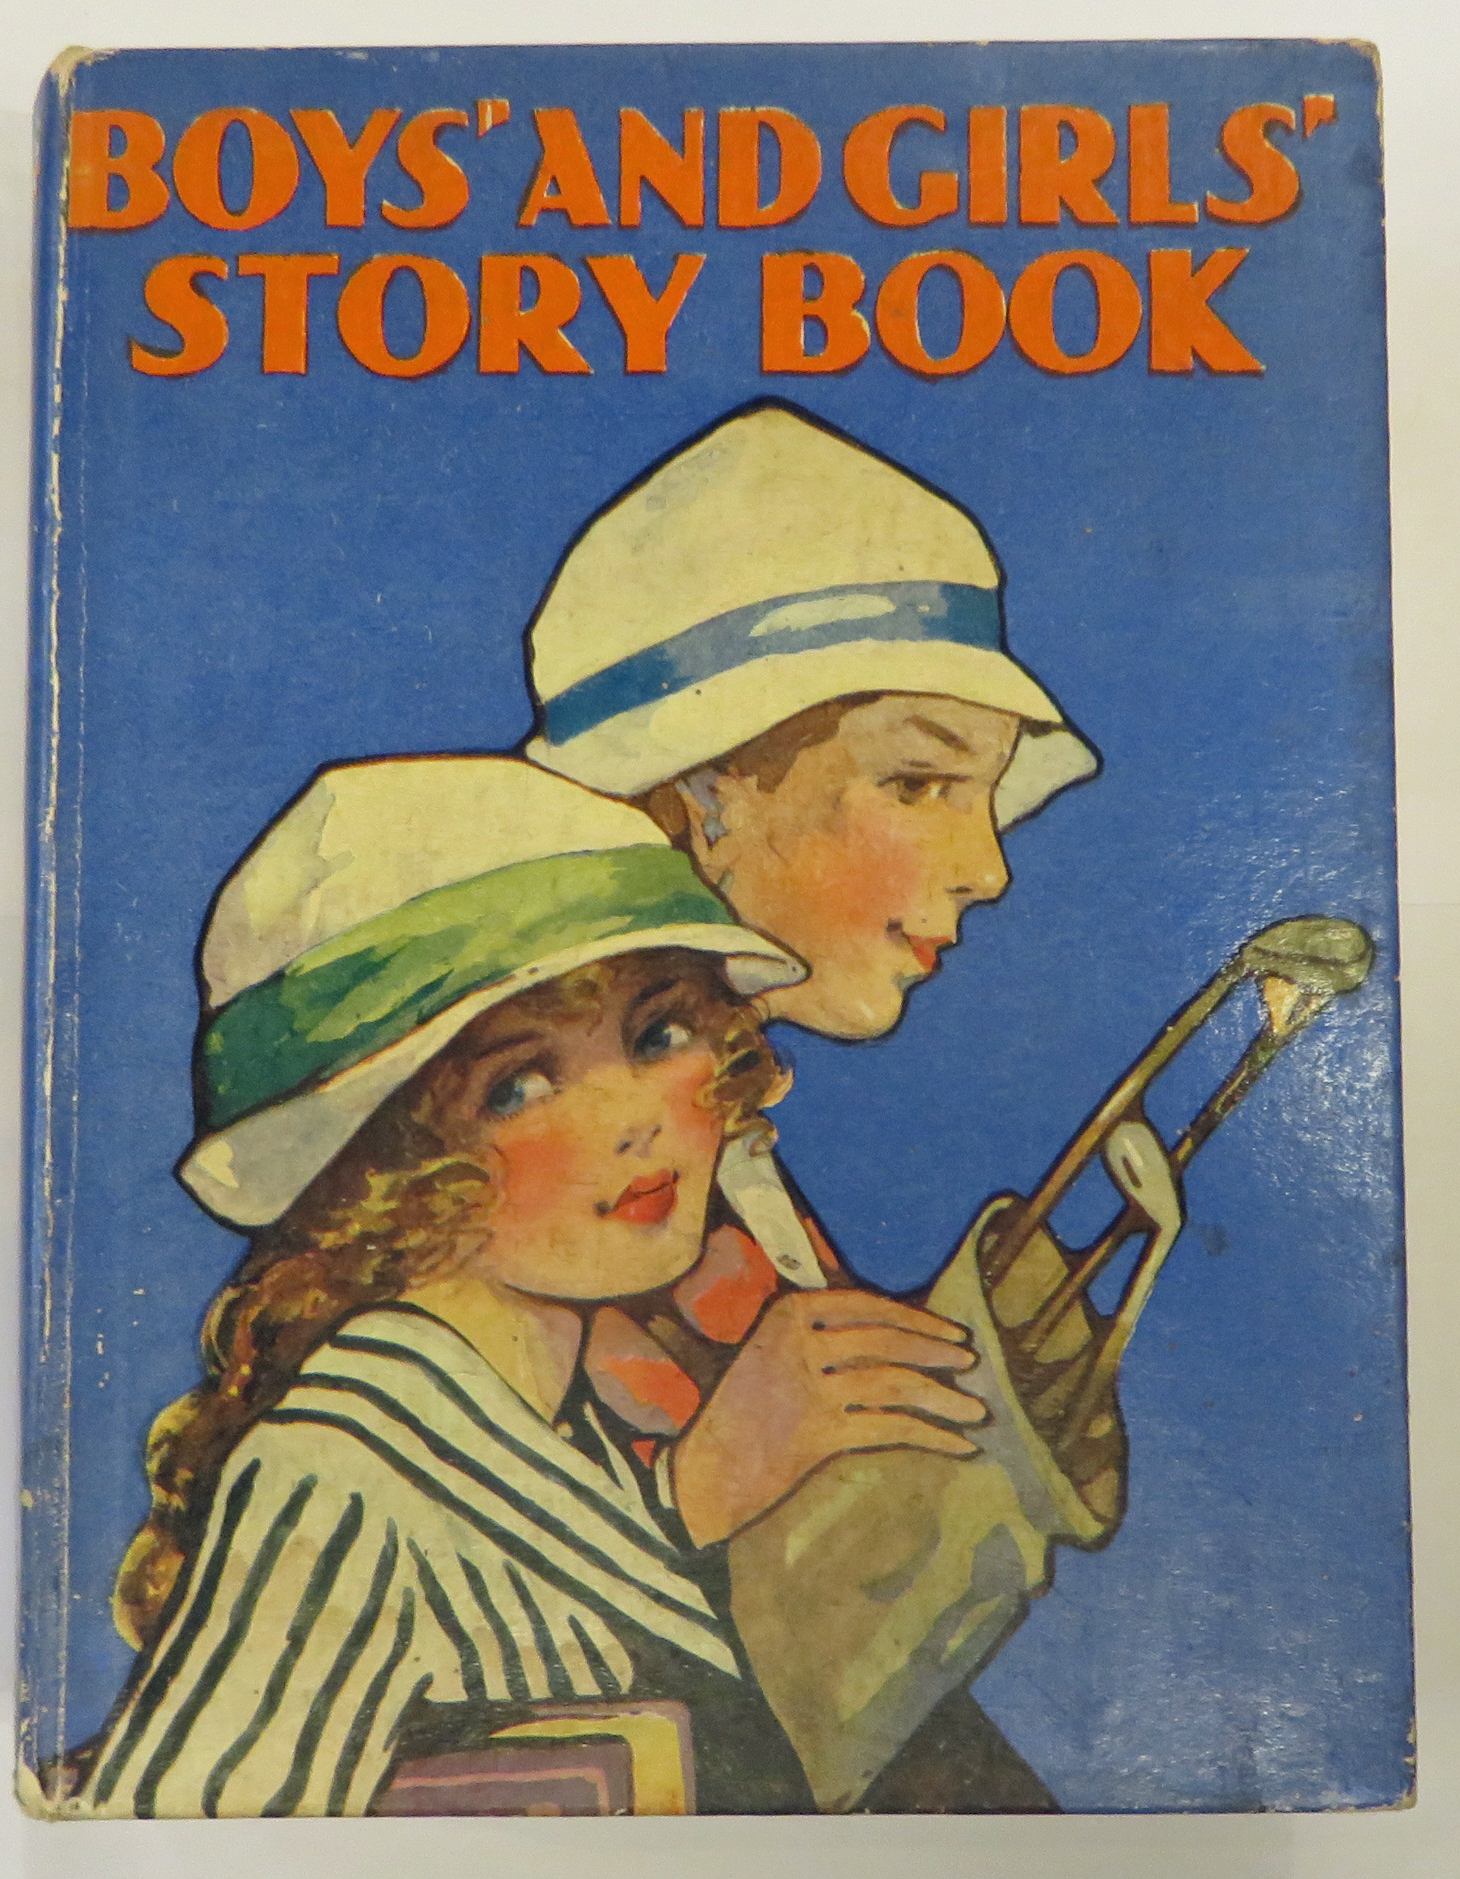 The Boys' And Girls' Story Book